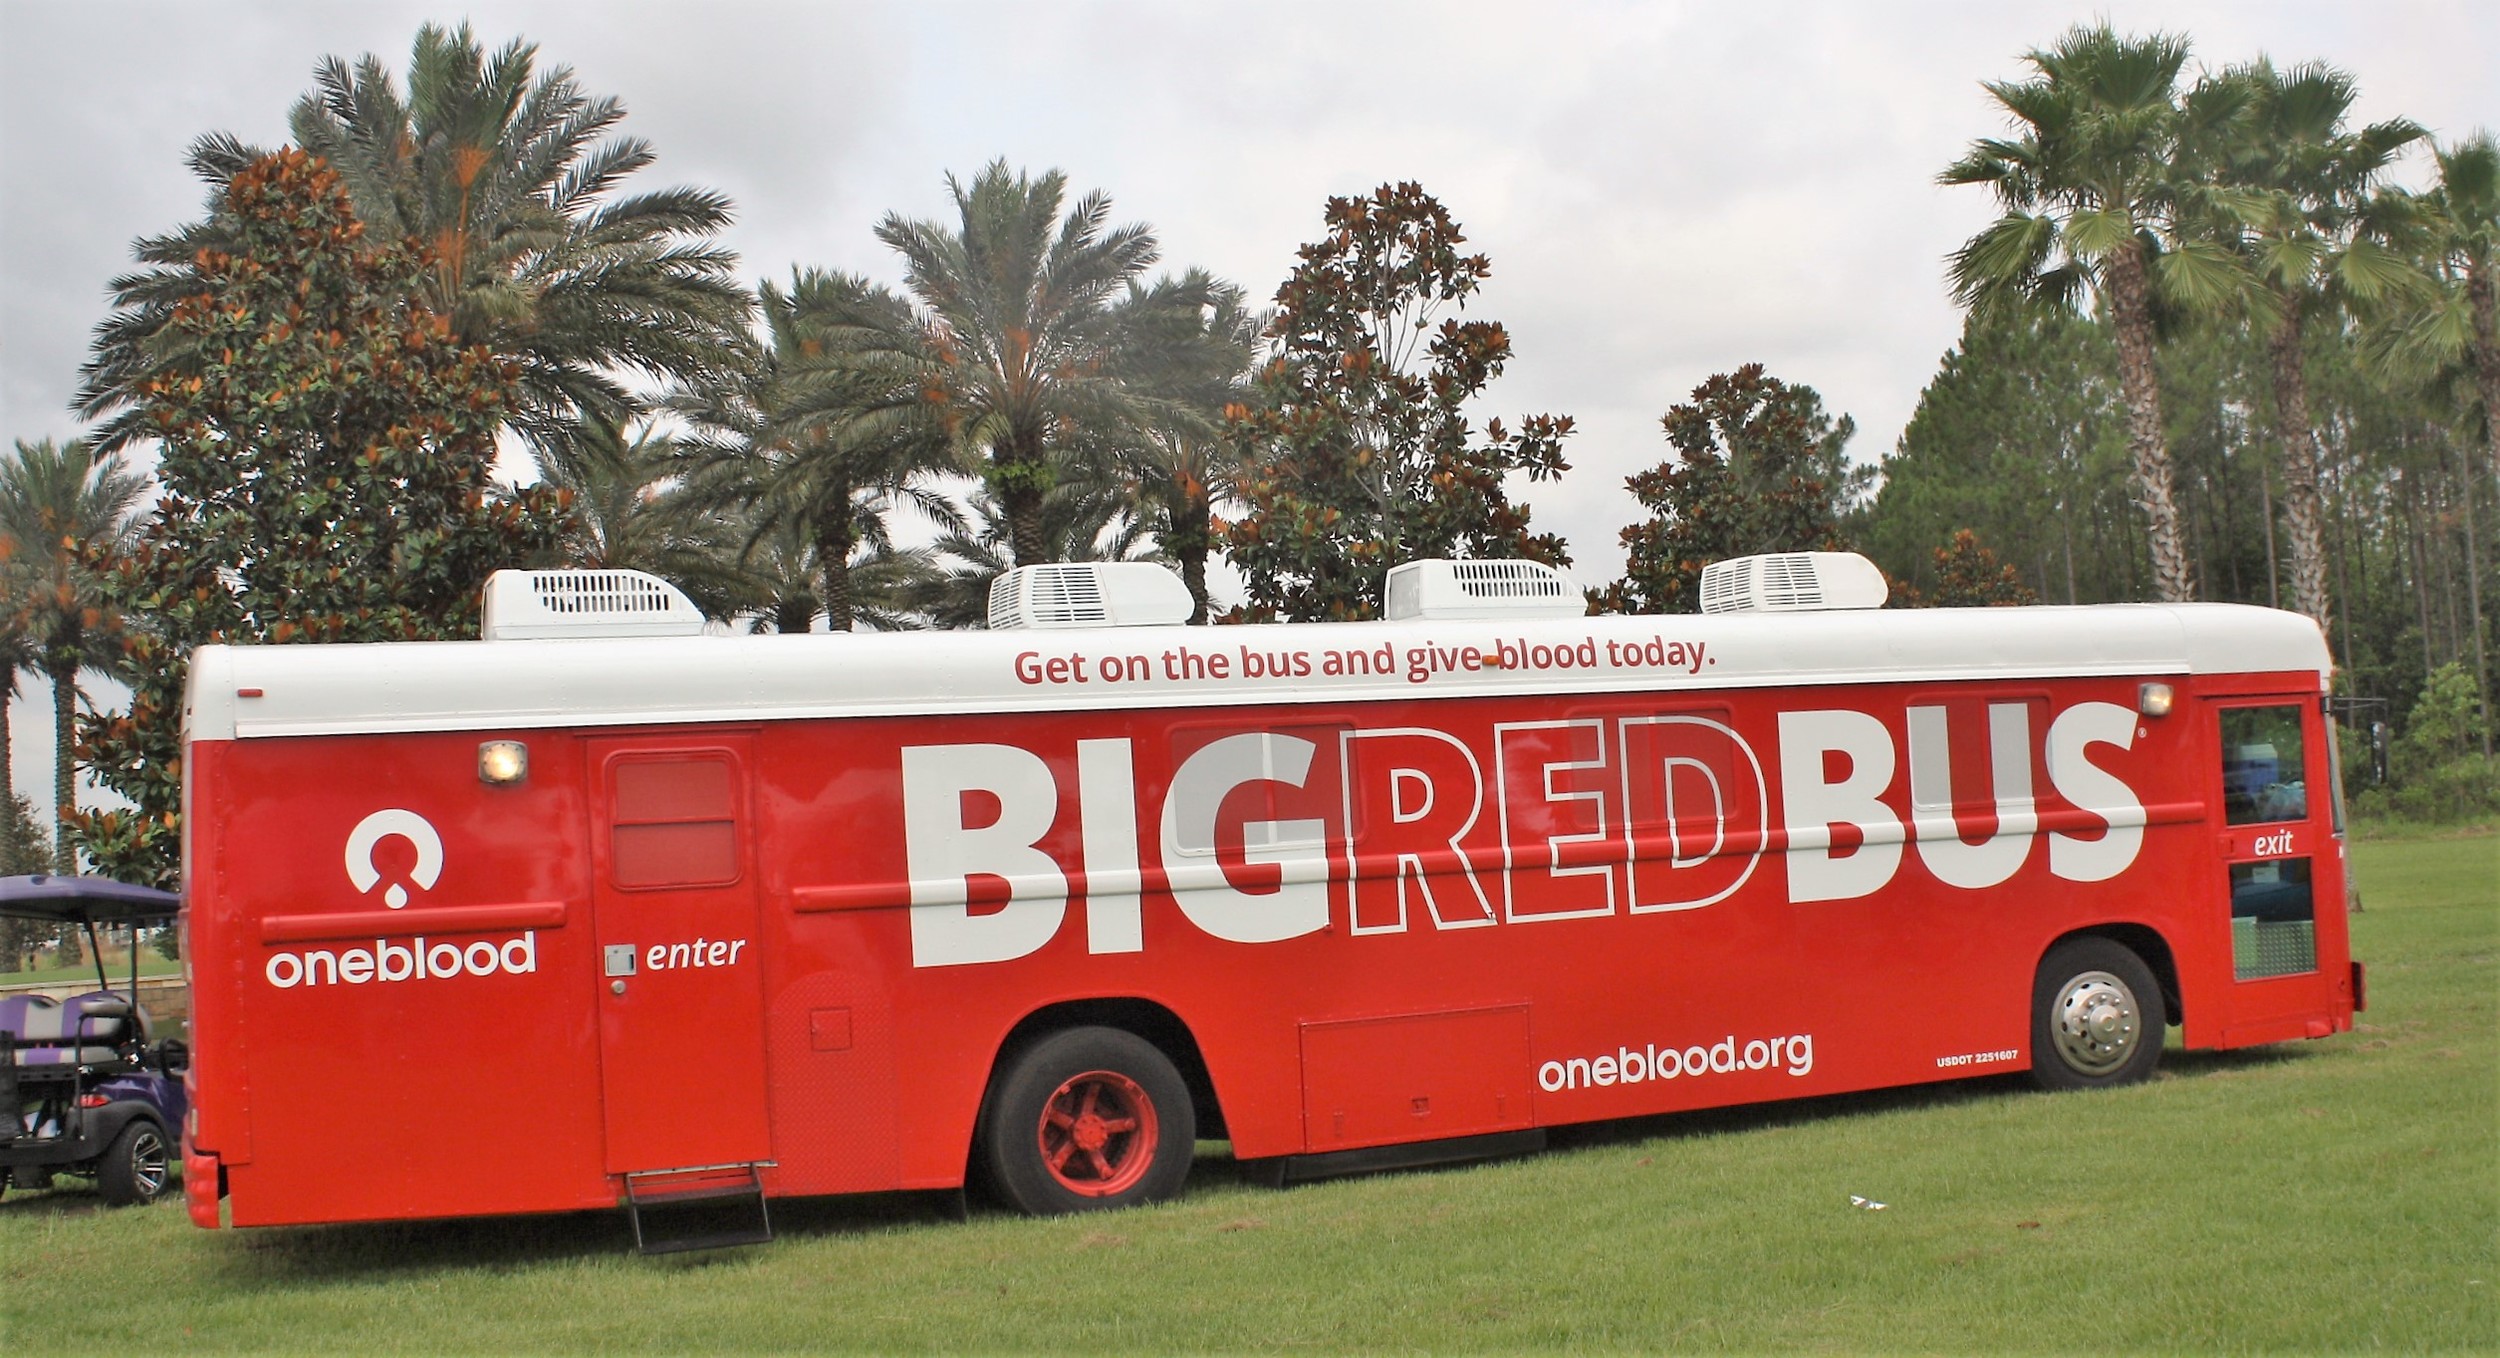 The OneBlood mobile blood unit was on hand to accept blood donations in the wake of the recent Orlando shooting.